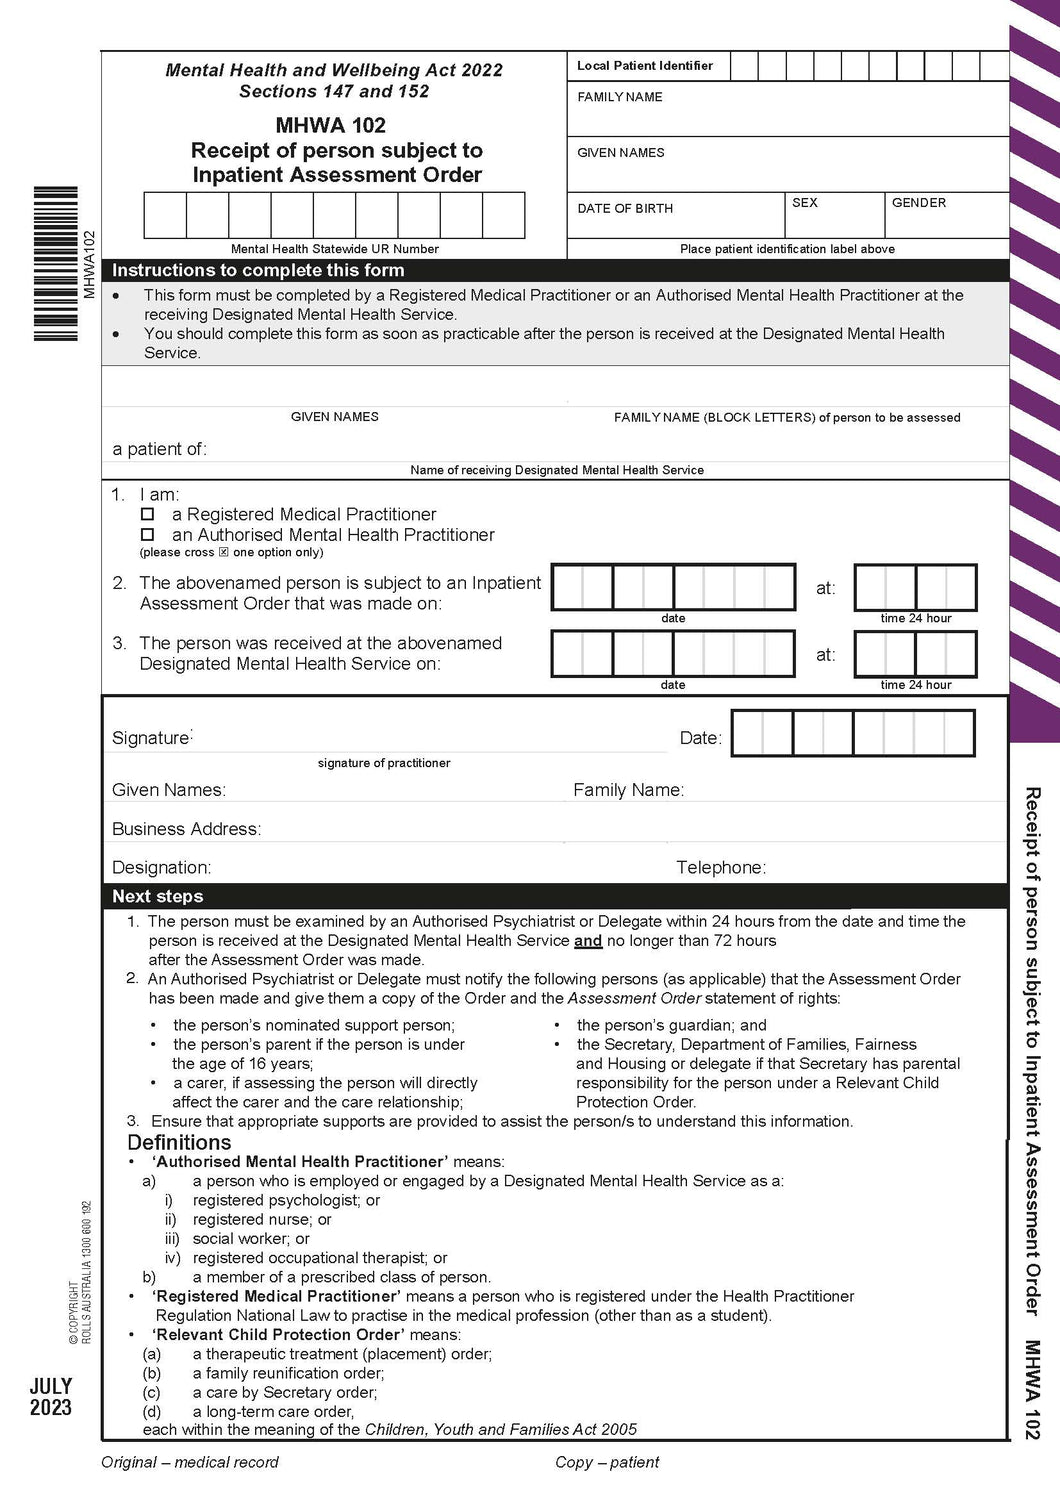 Rolls MHWA102 Receipt of person subject to Inpatient Assessment Order 2 part sets